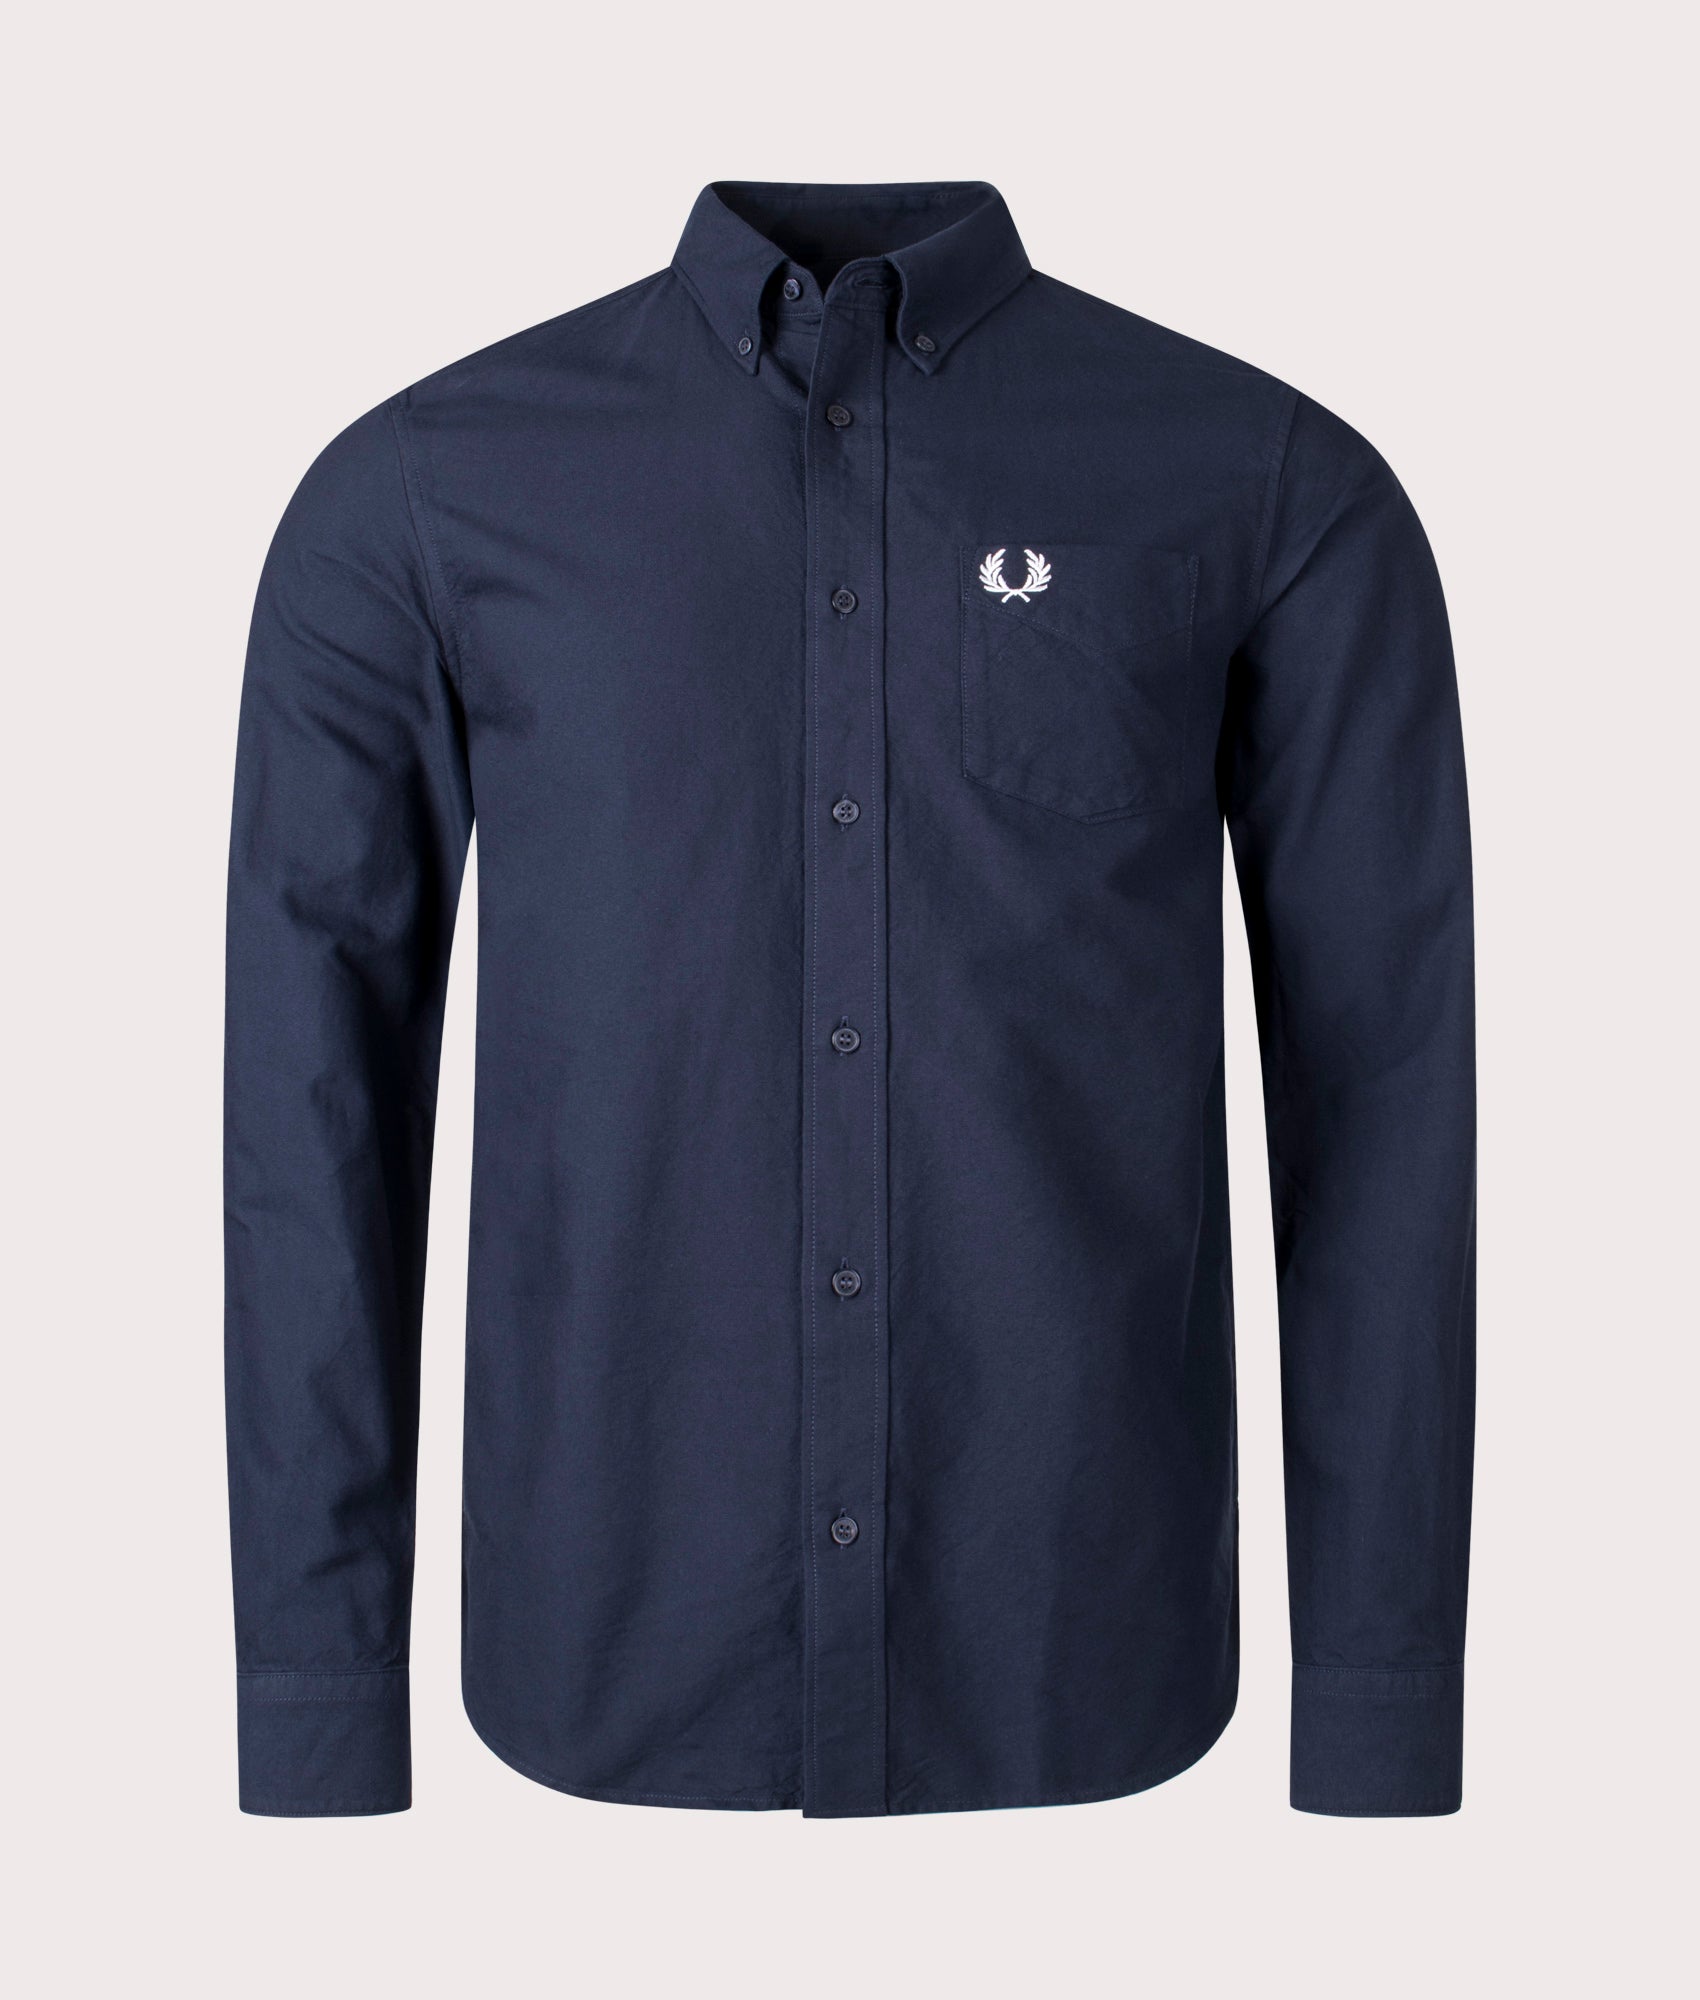 Fred Perry Mens Oxford Shirt - Colour: 608 Navy - Size: Medium